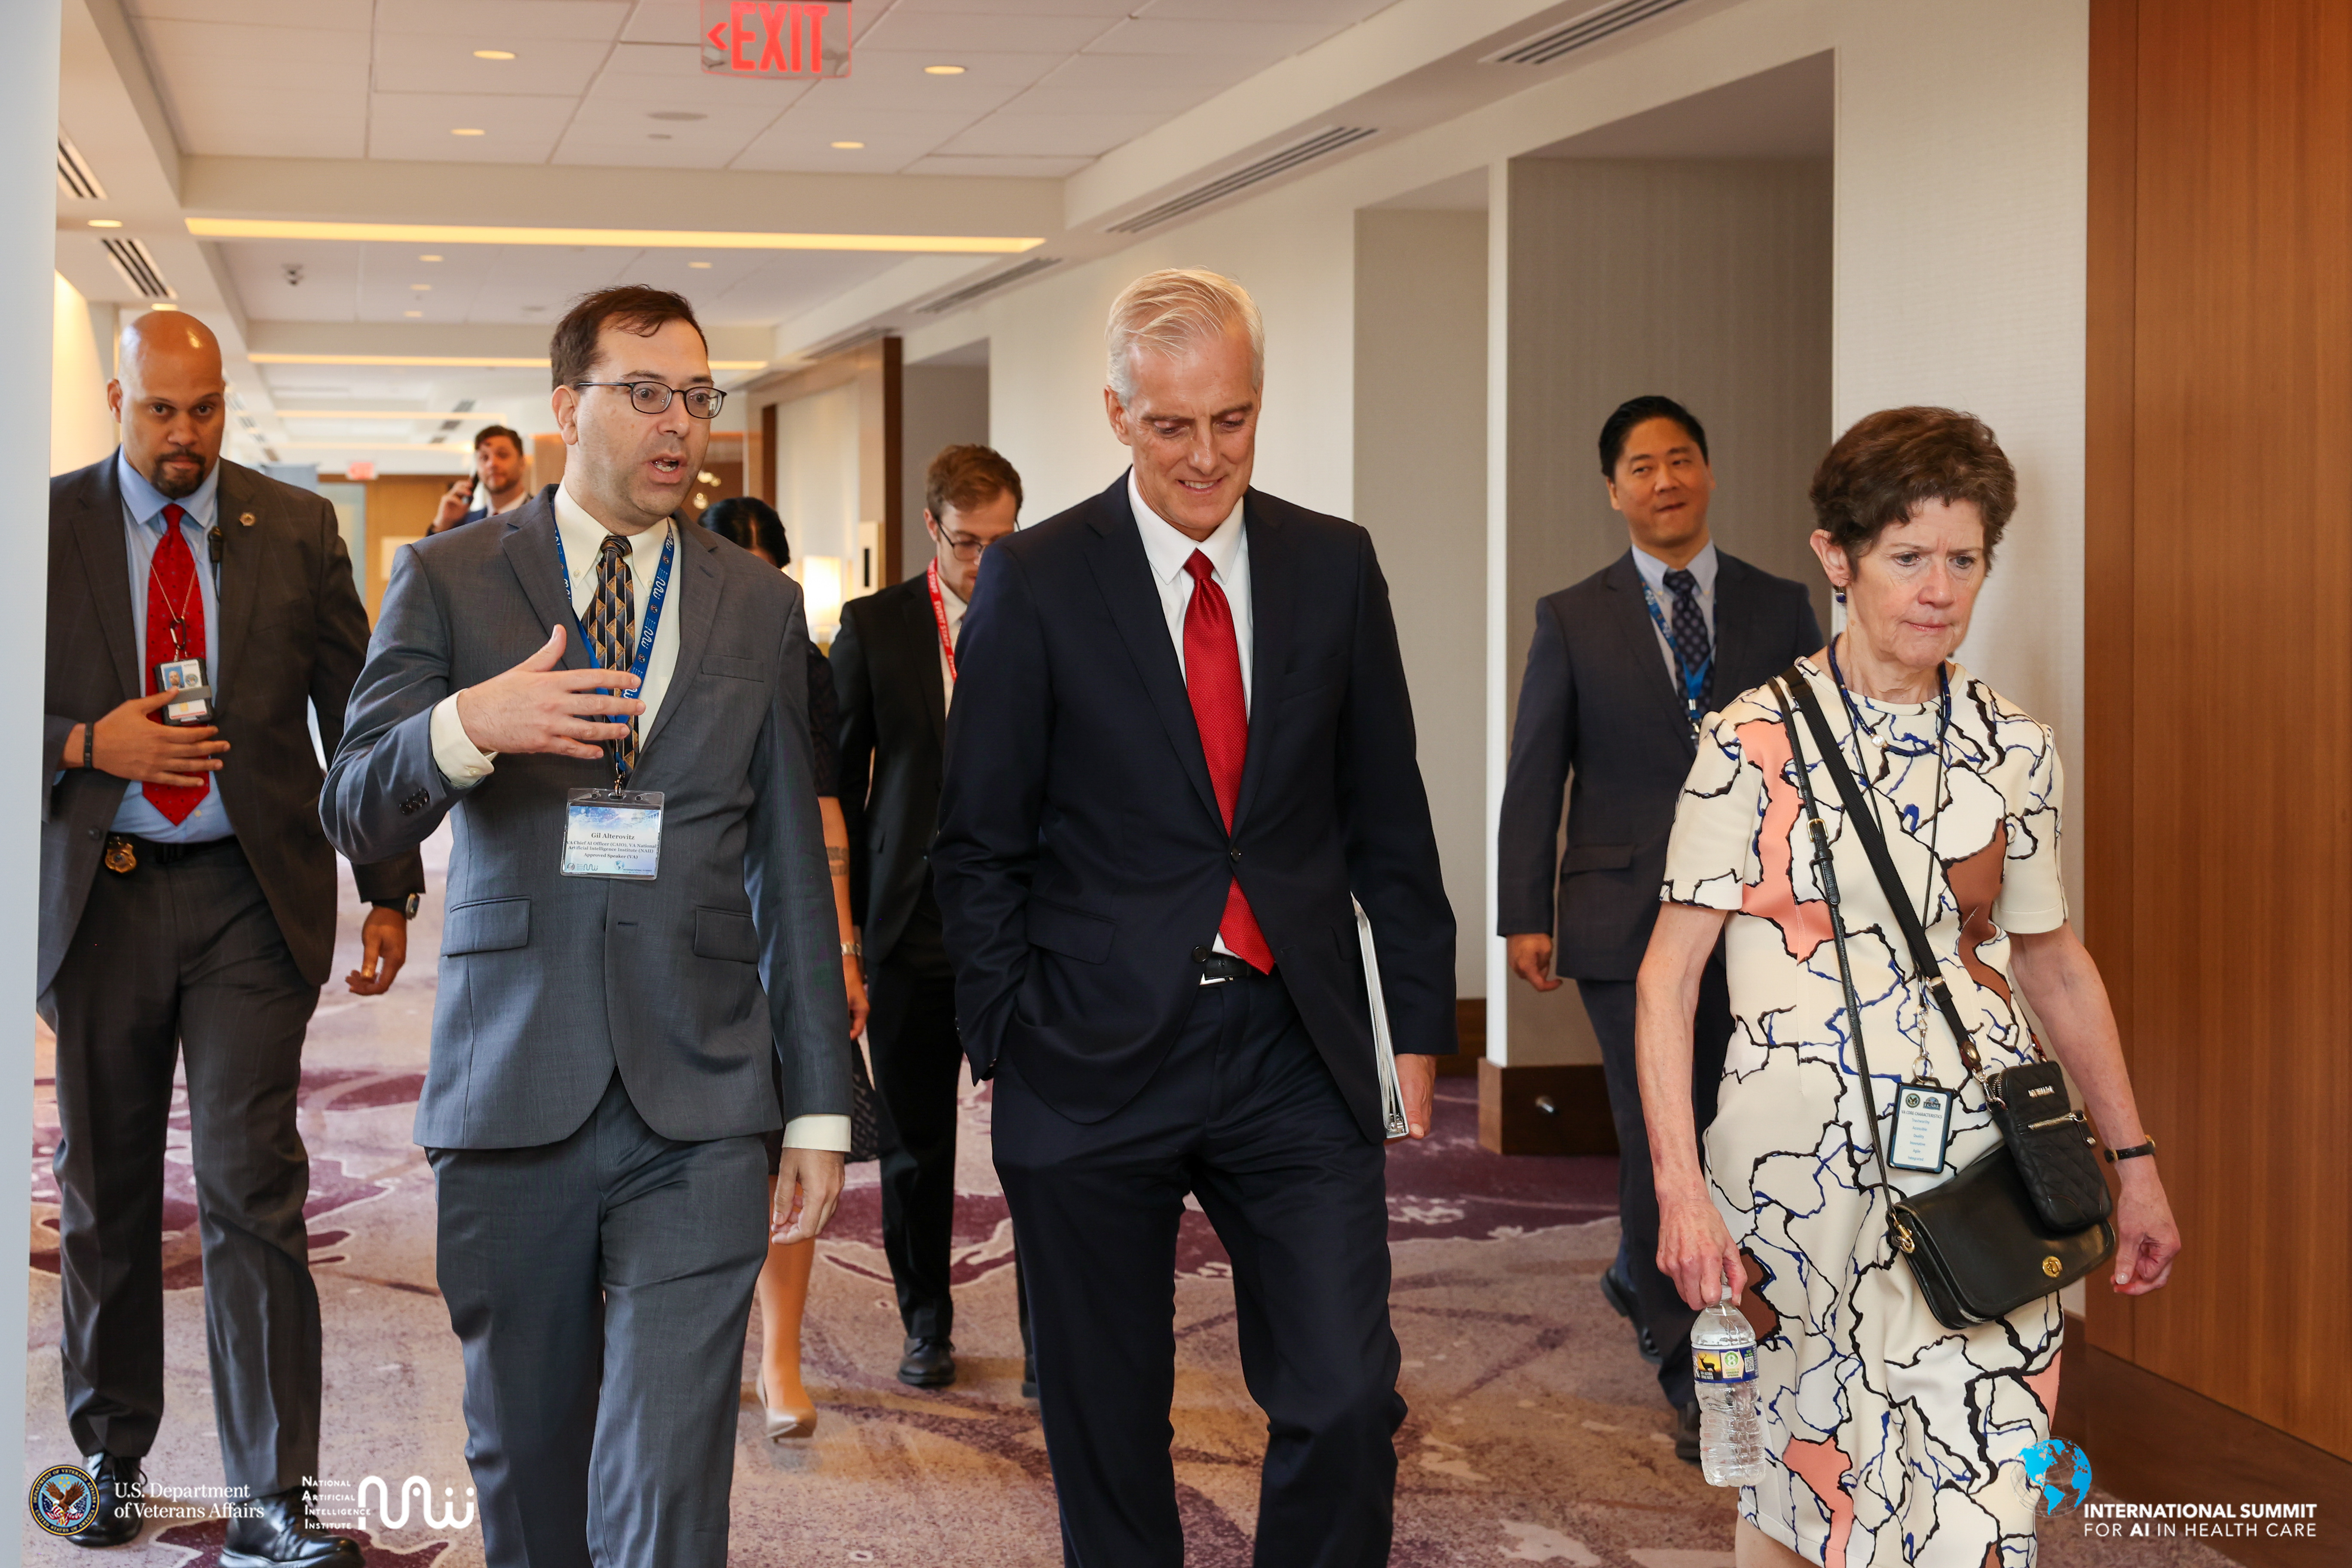 The Honorable Denis McDonough entering the AI Summit with Dr. Alterovitz and Dr. Clancy